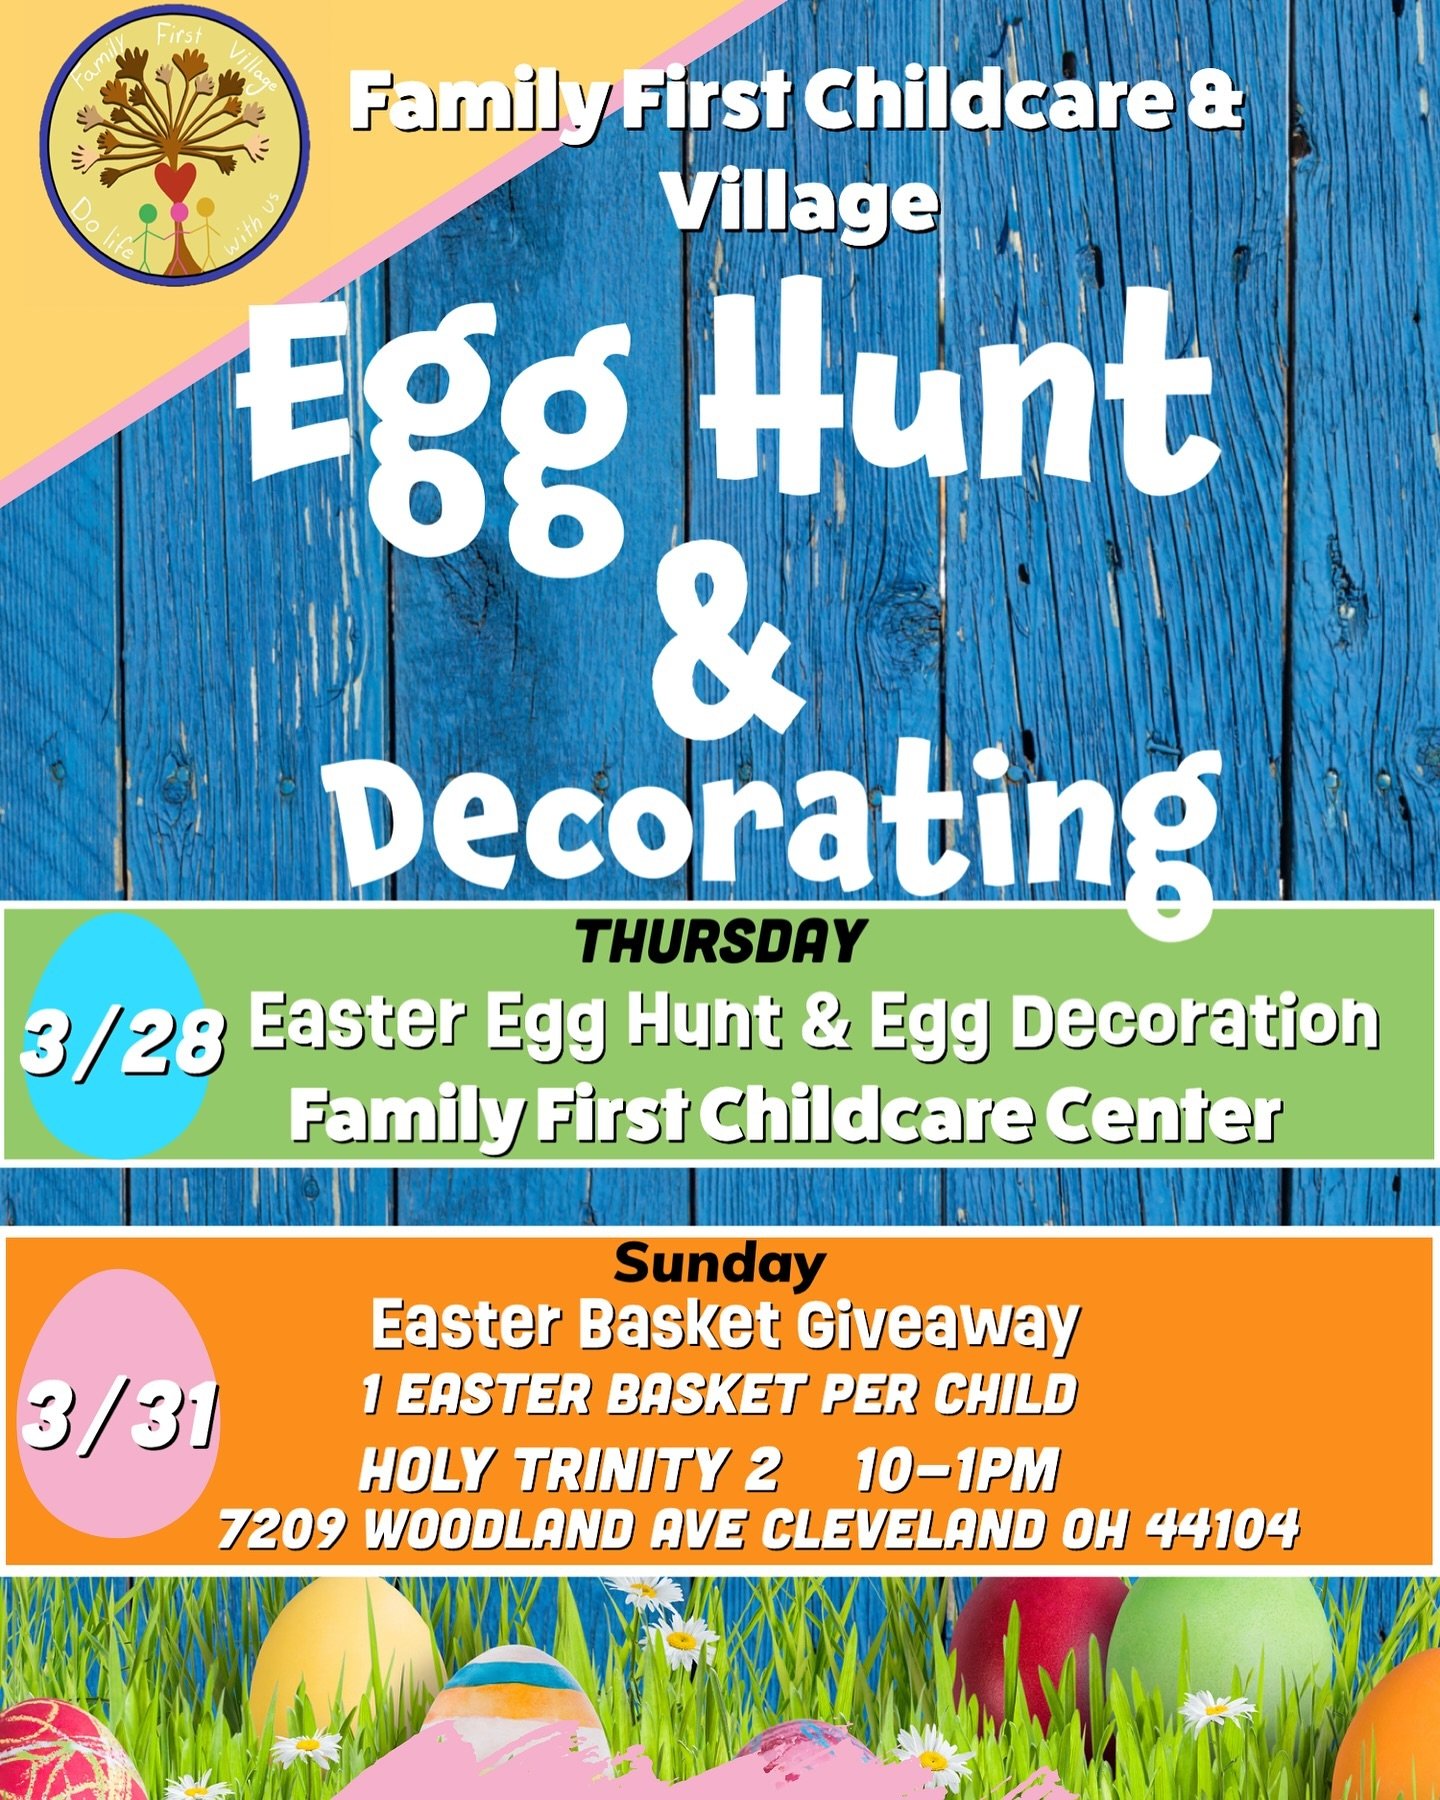 WE WOULD BE EGG-CITED TO SEE YOU!!!